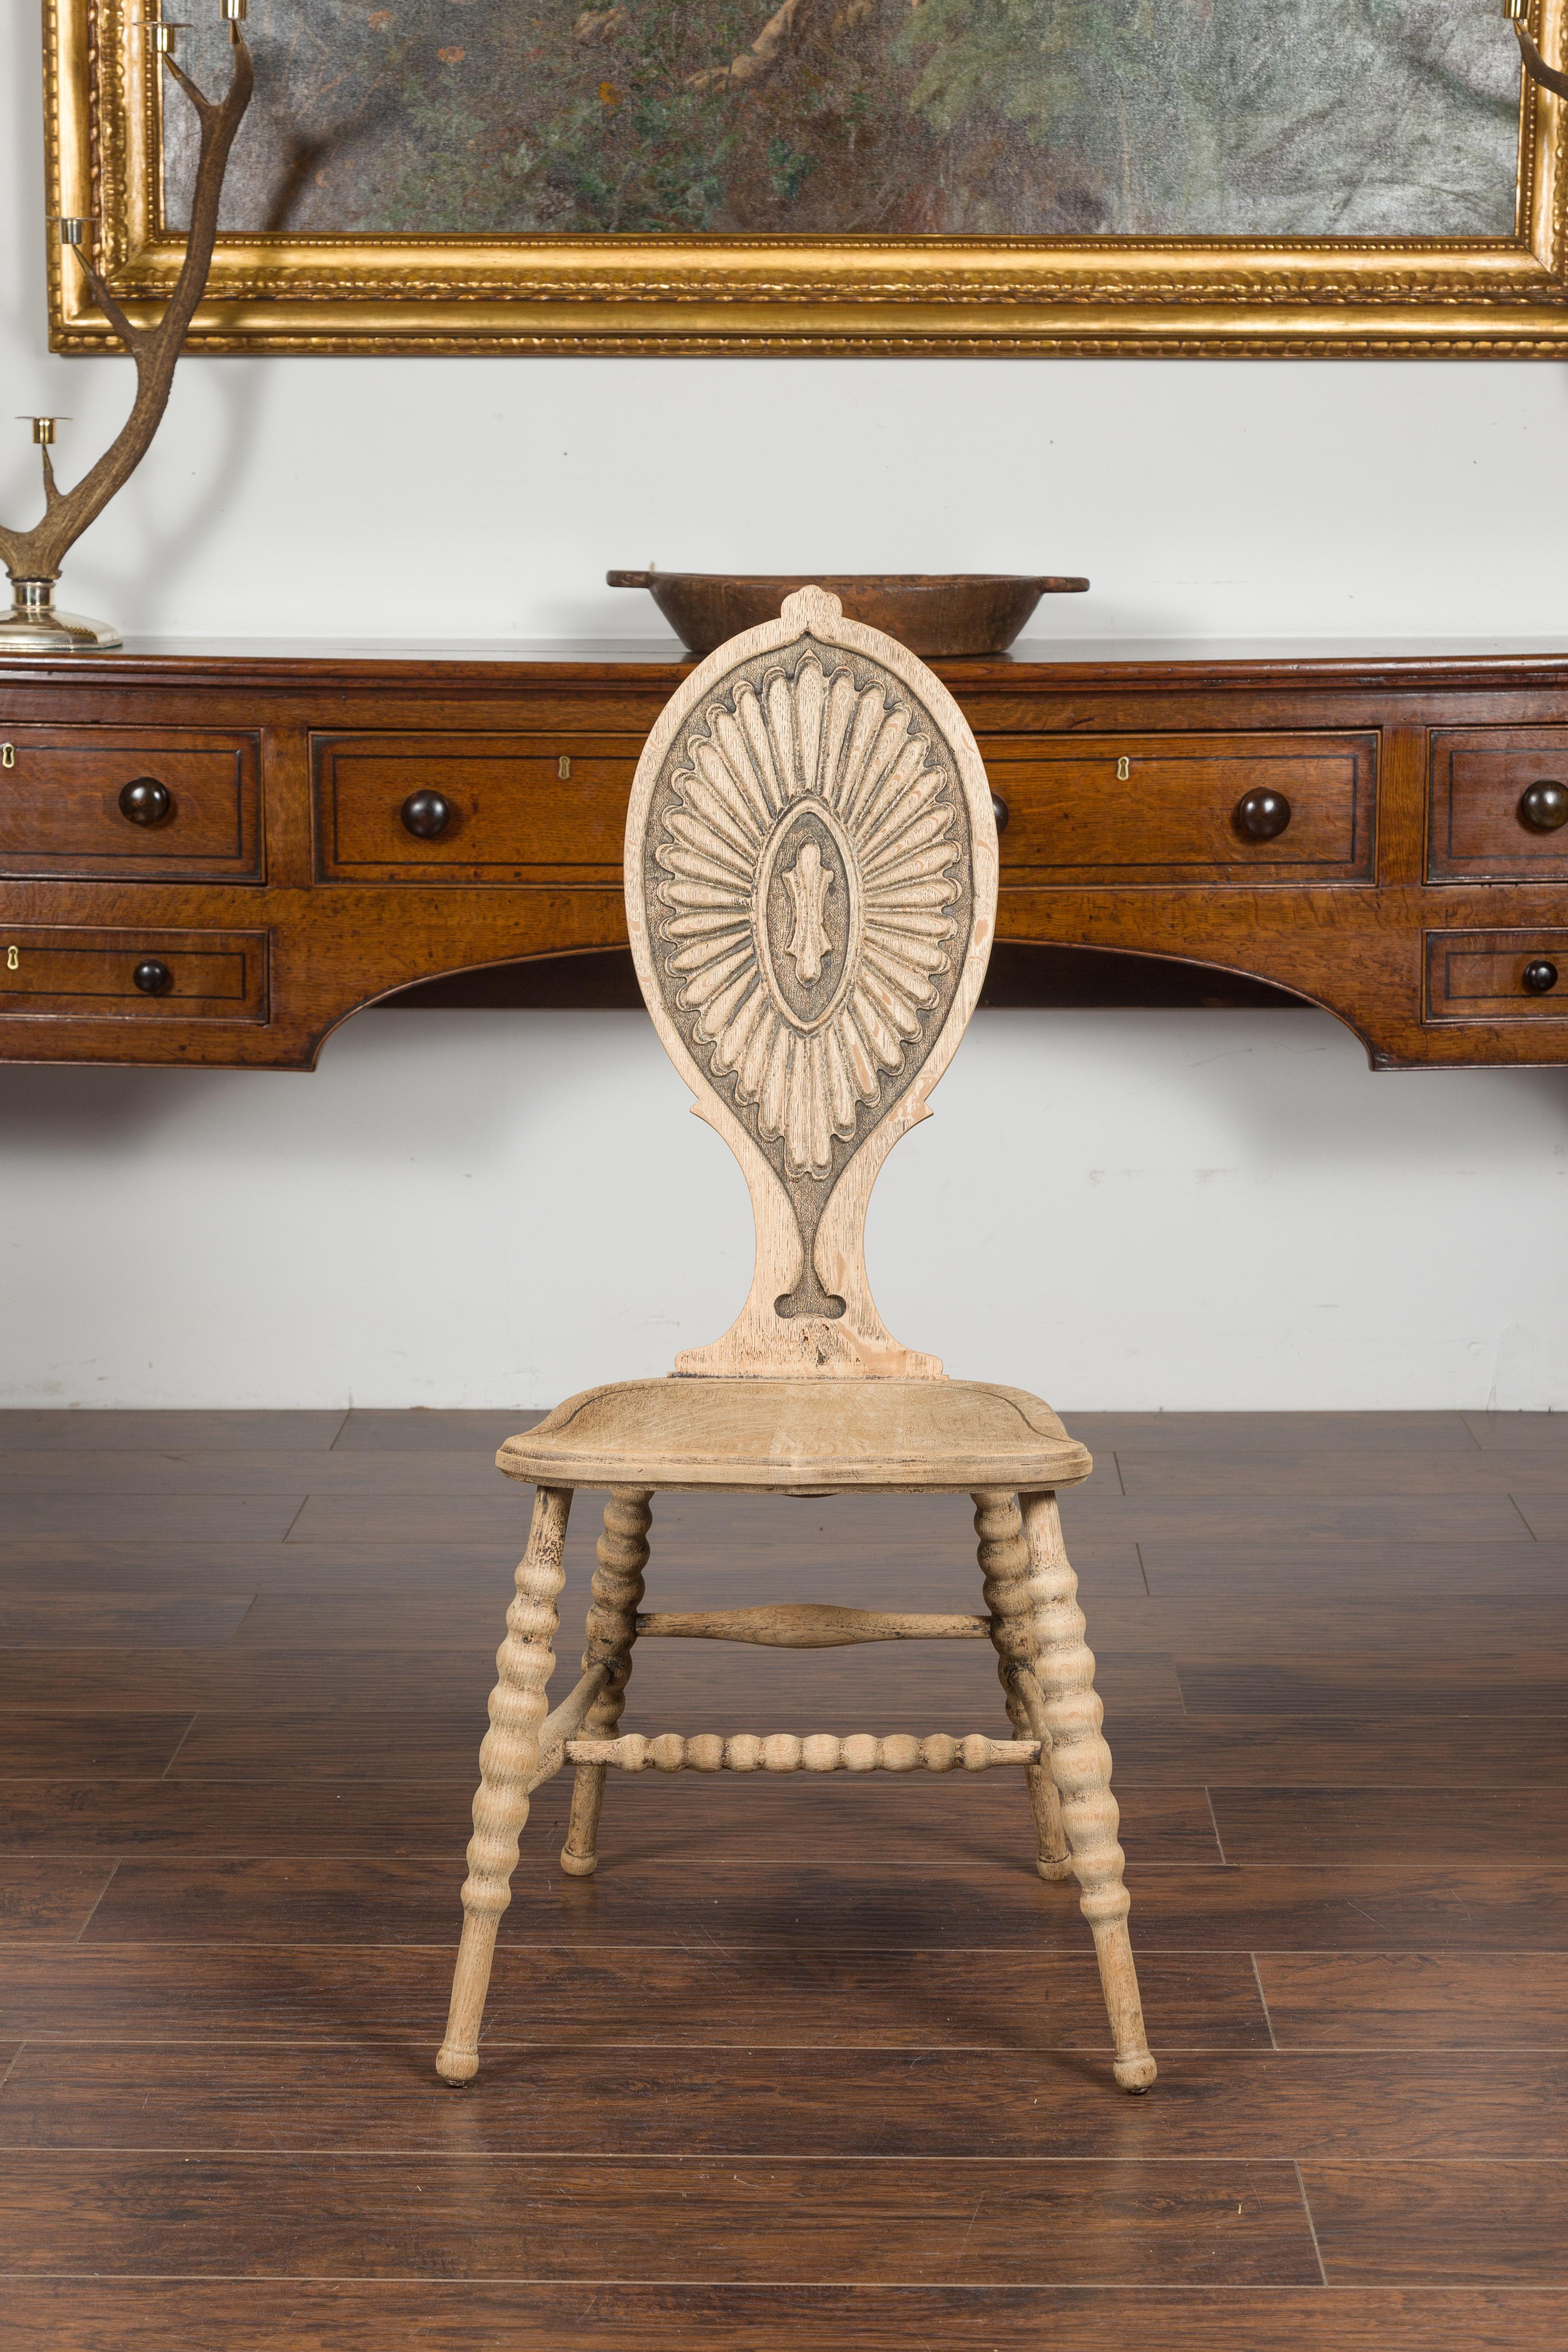 An Austrian Biedermeier style bleached chair from the late 19th century, with bobbin legs and carved back. Created in Austria during the last quarter of the 19th century, this Biedermeier chair captures our attention with its teardrop back carved